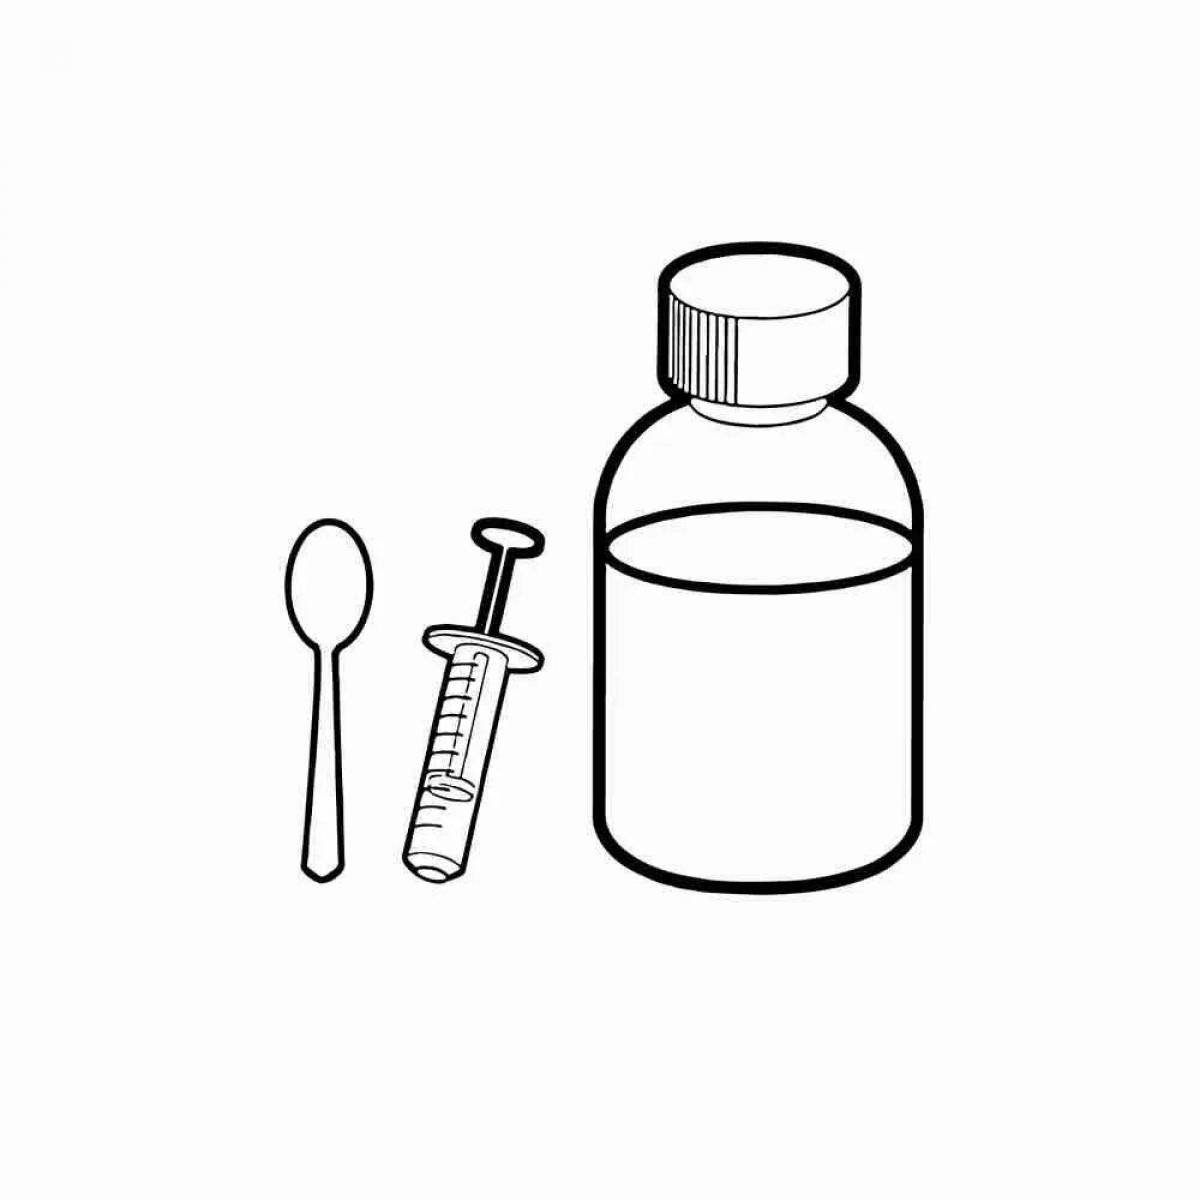 Coloring page fascinating drugs